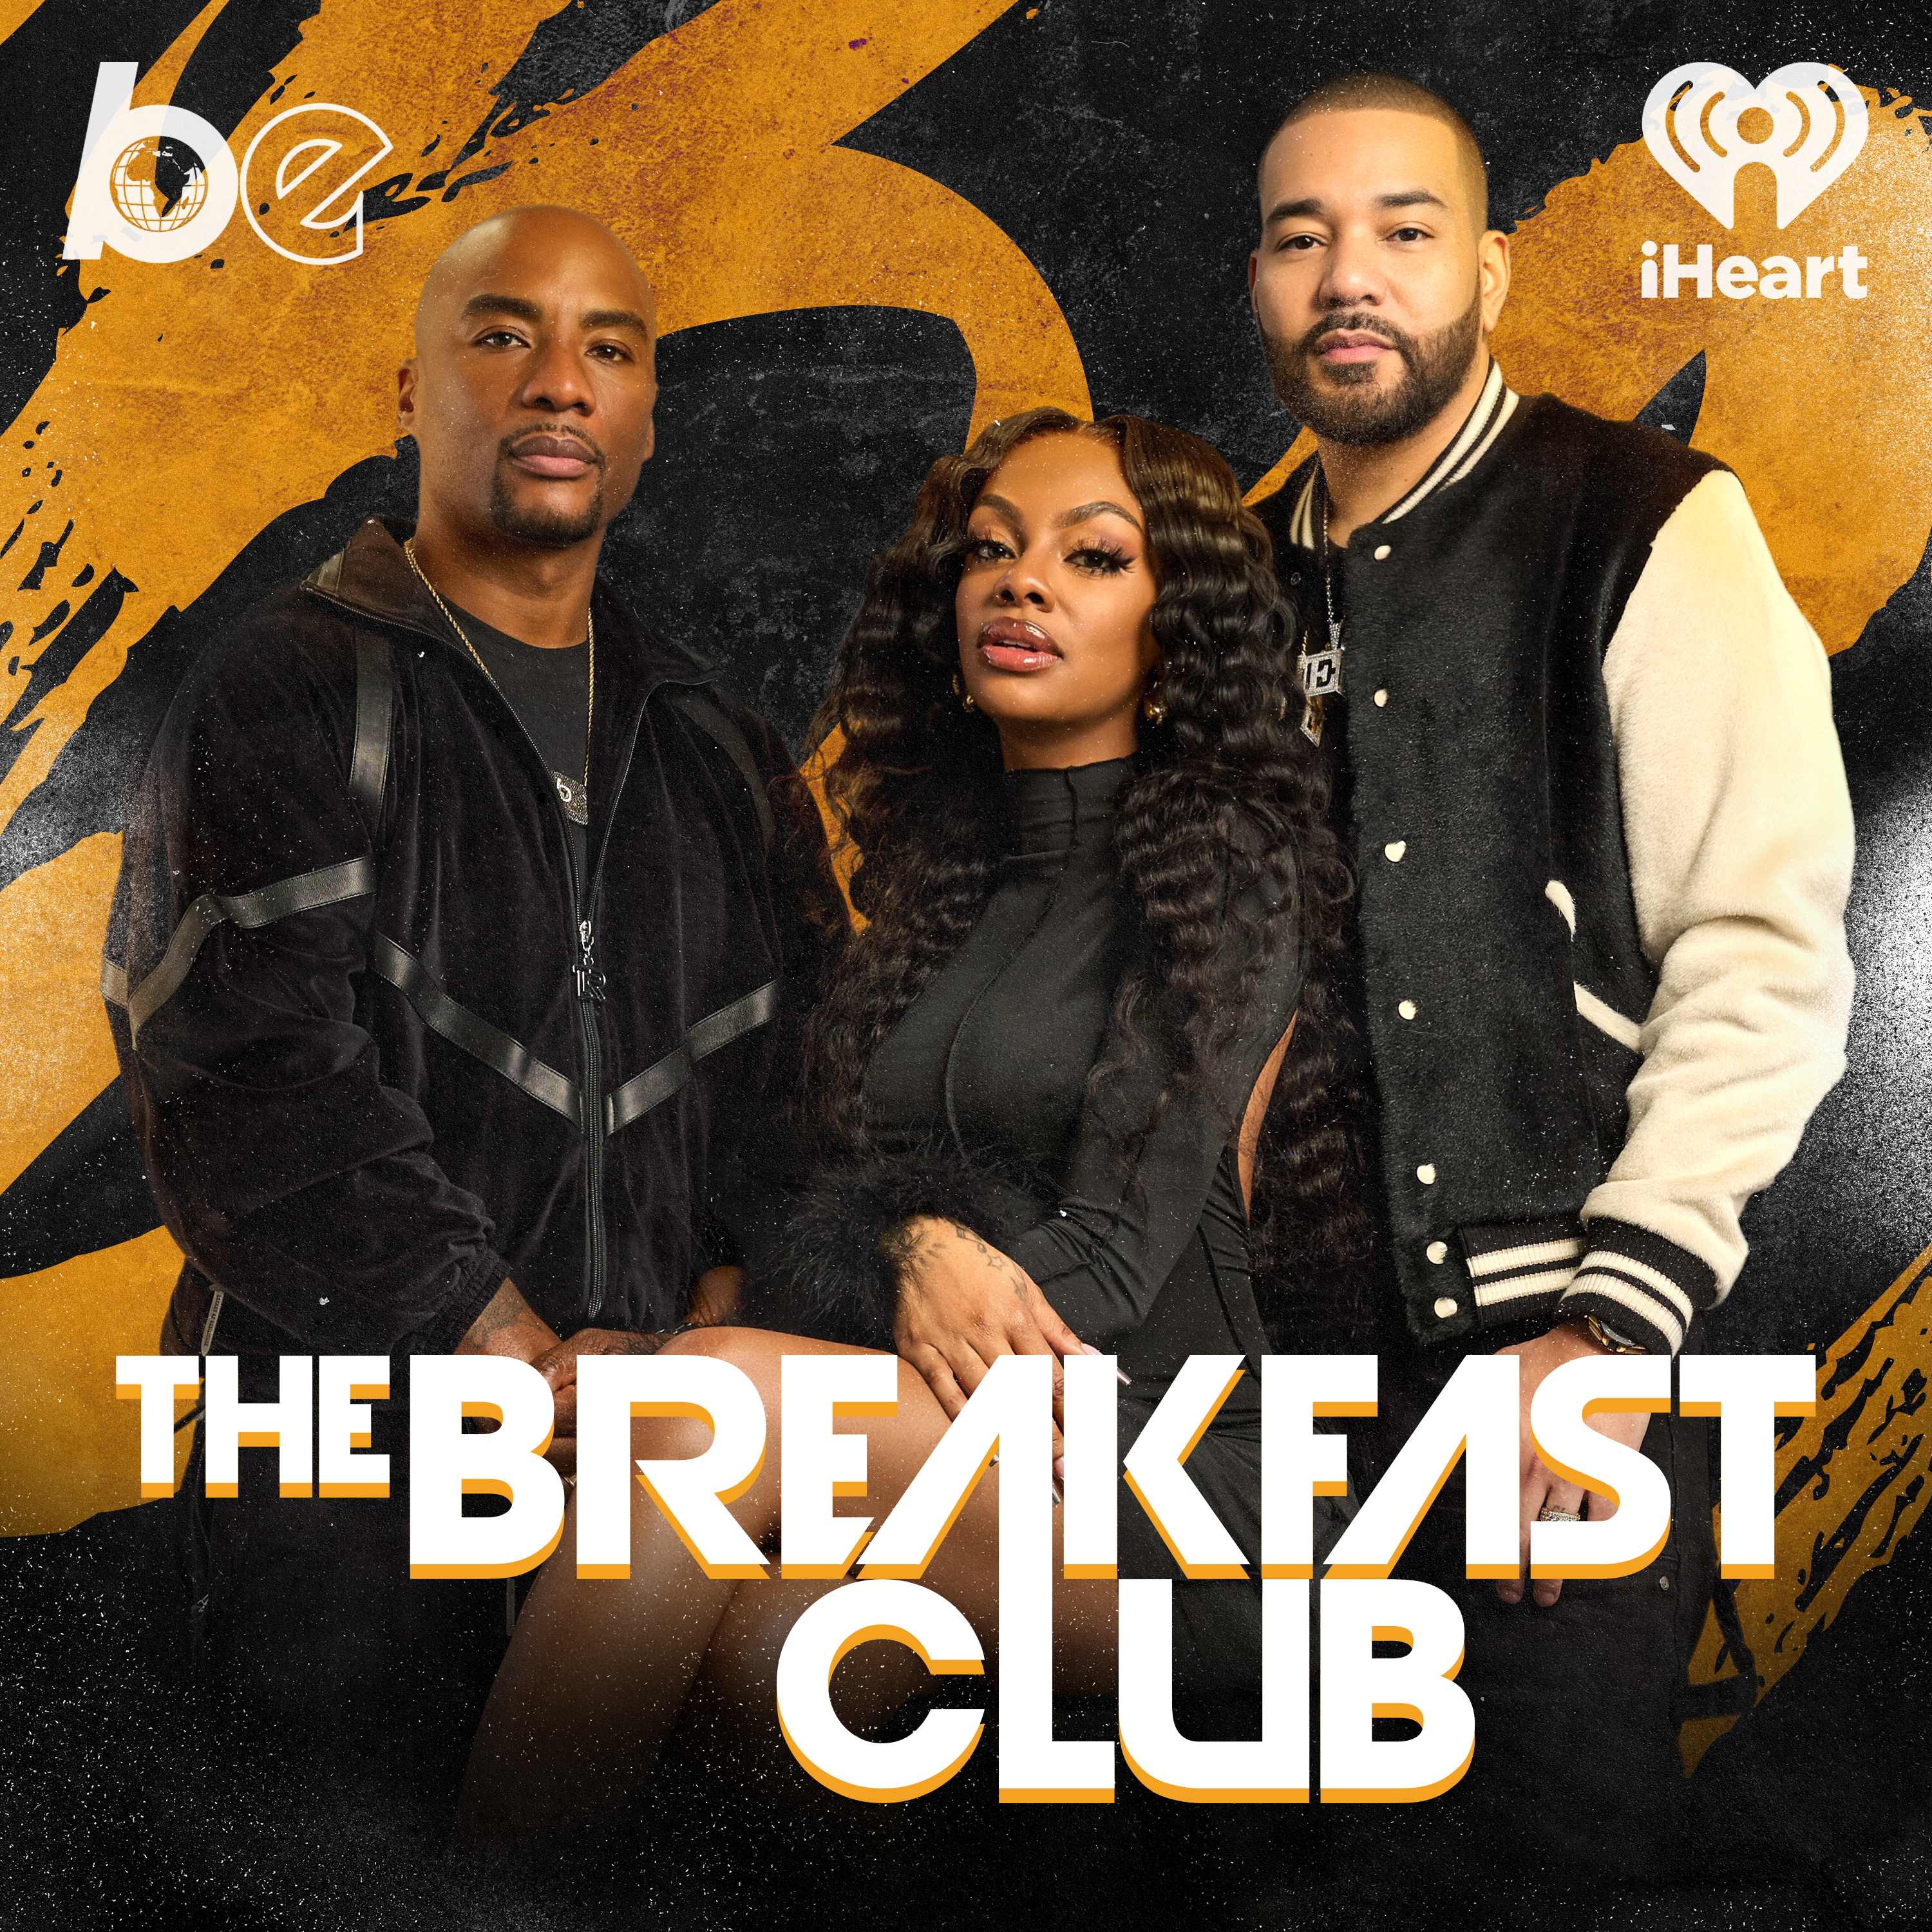 FULL SHOW: Columbus Short ‘Snitches’ On Diddy, Lil Nax X Facing Backlash, Jeannie Mai ‘Gutted’ By Divorce From Jeezy, Ashanti Reportedly Expecting Her First Child With Nelly,Blueface Accuses Chrisean Rock Of Neglecting Their Son, Natalie Nunn Kicked Out Of Restaurant + More (Guest Host: Jason Lee)